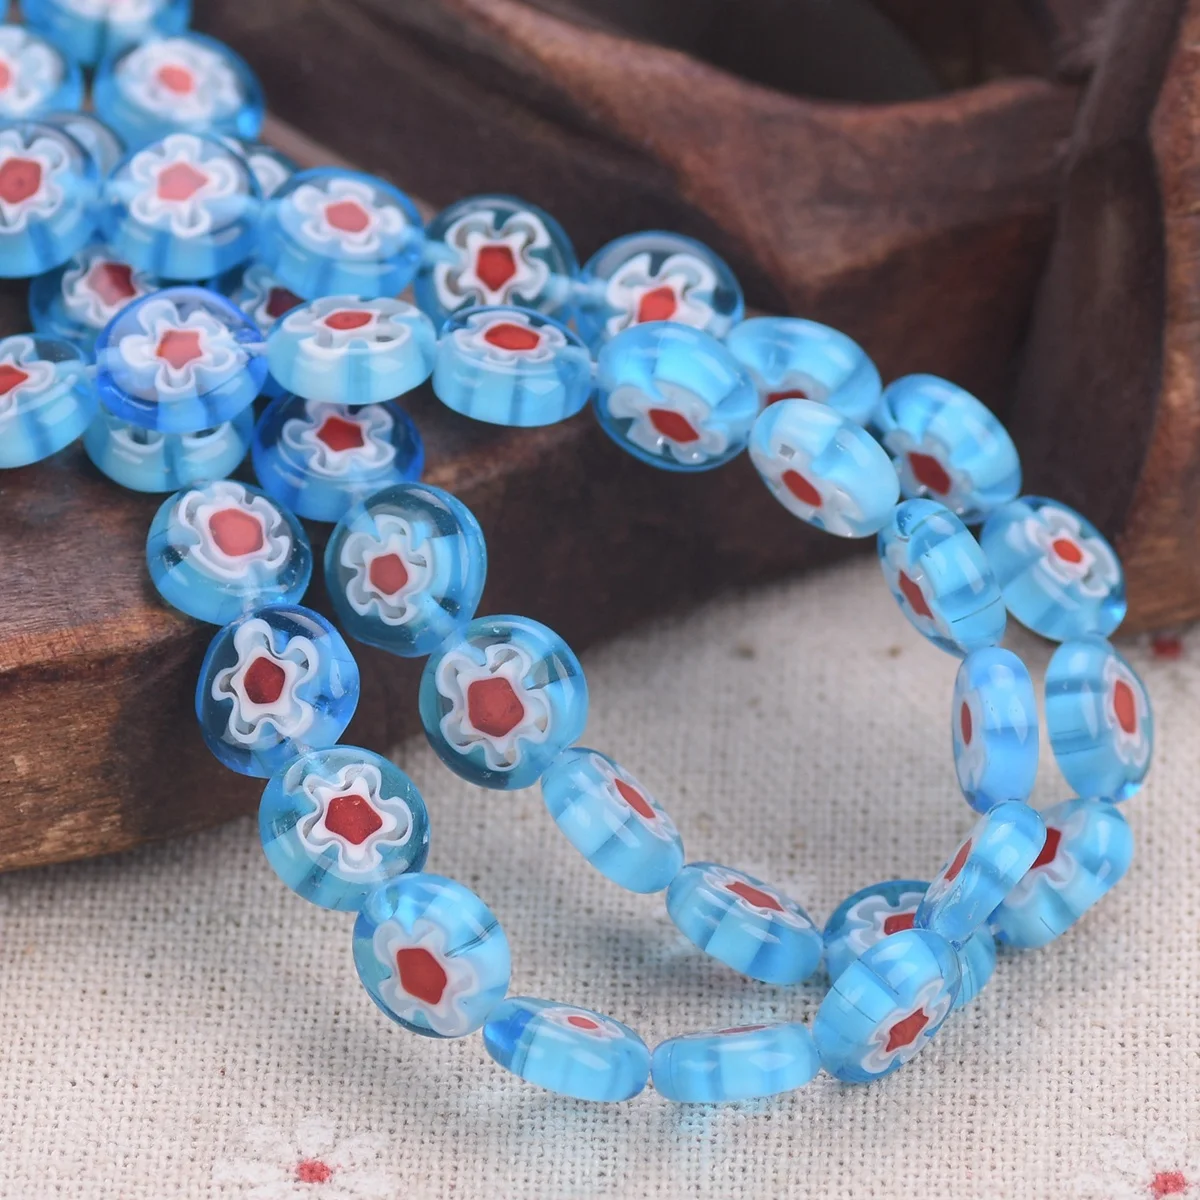 35pcs(1 Strand) Flat Round 10mm Lake Blue Flower Handmade Millefiori Glass Loose Beads Lot For Jewelry Making DIY Craft Findings u shaped flower pot silicone mold diy arch scented candle holder making mould plaster resin ornament craft desktop decor